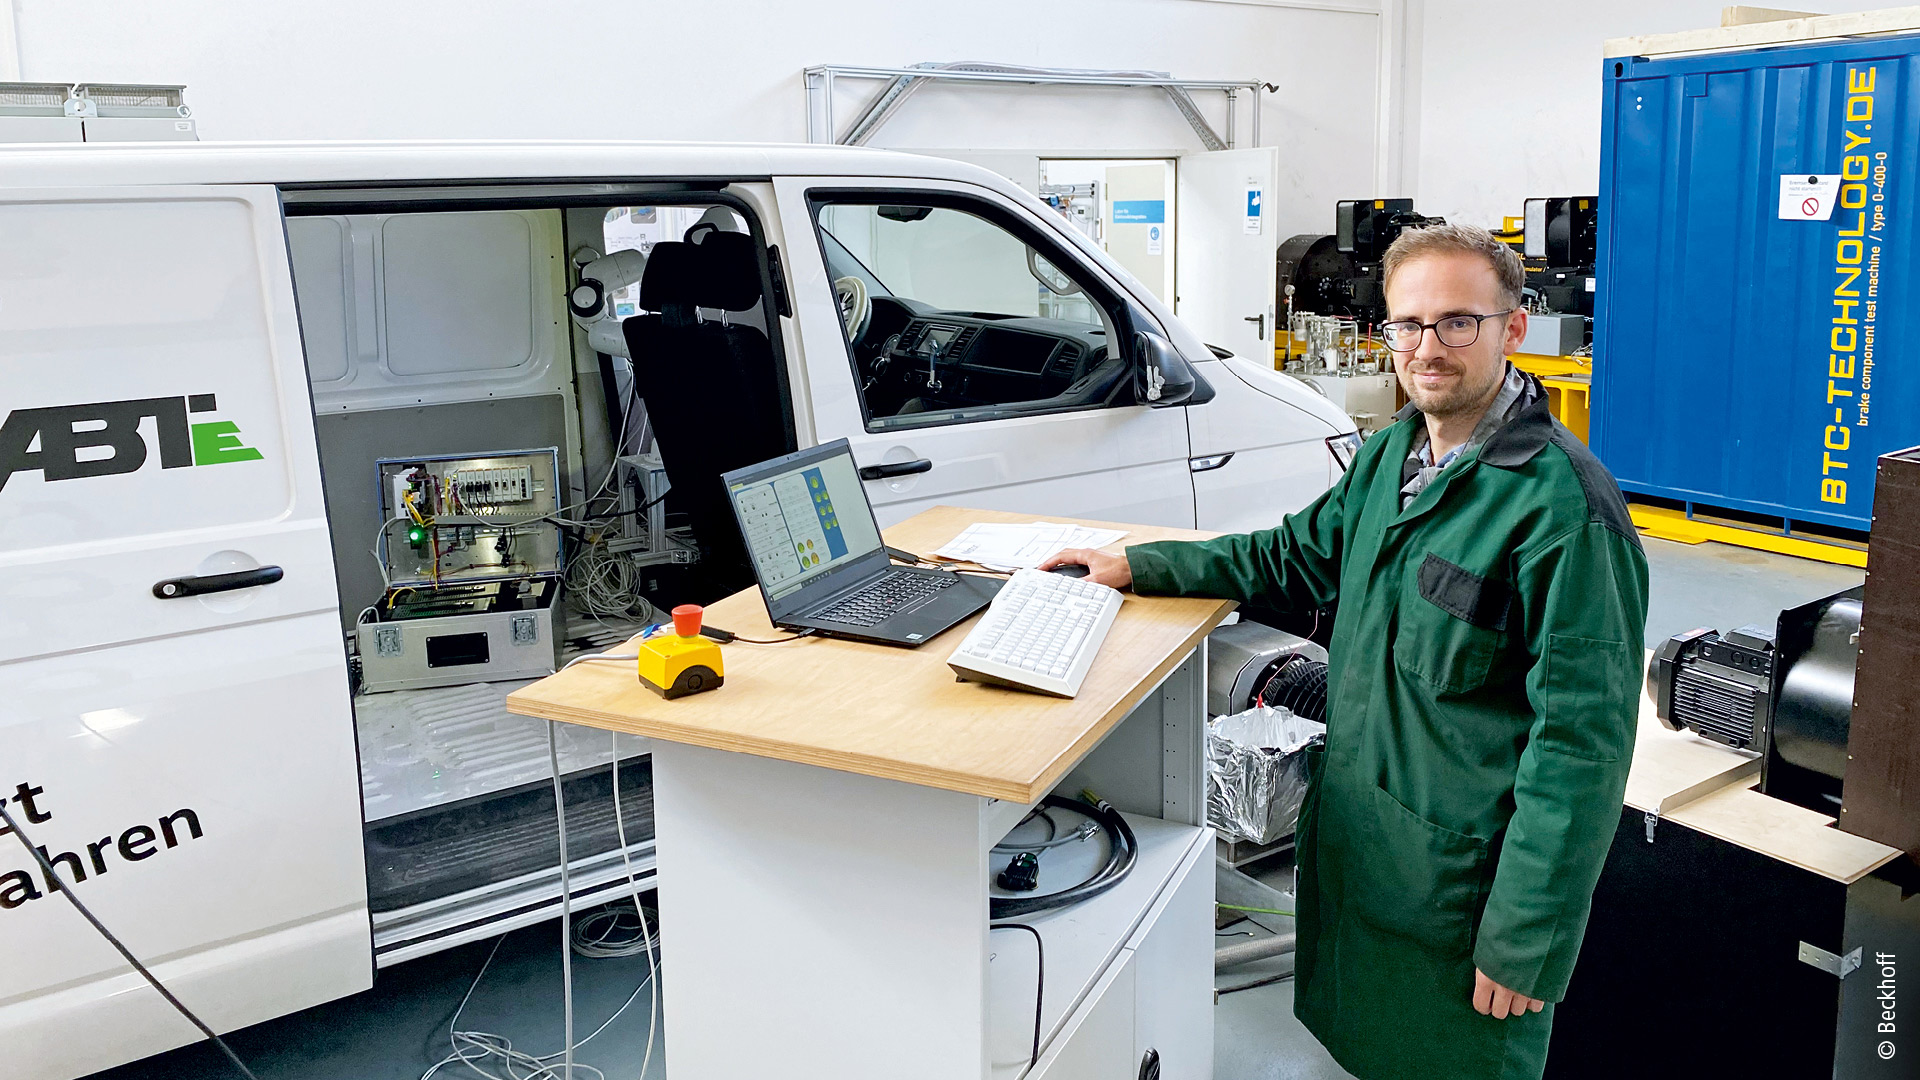 Florian Zerbes, Research Assistant at the Allgäu Research Center at HS Kempten, on hand during the vehicle testing process 